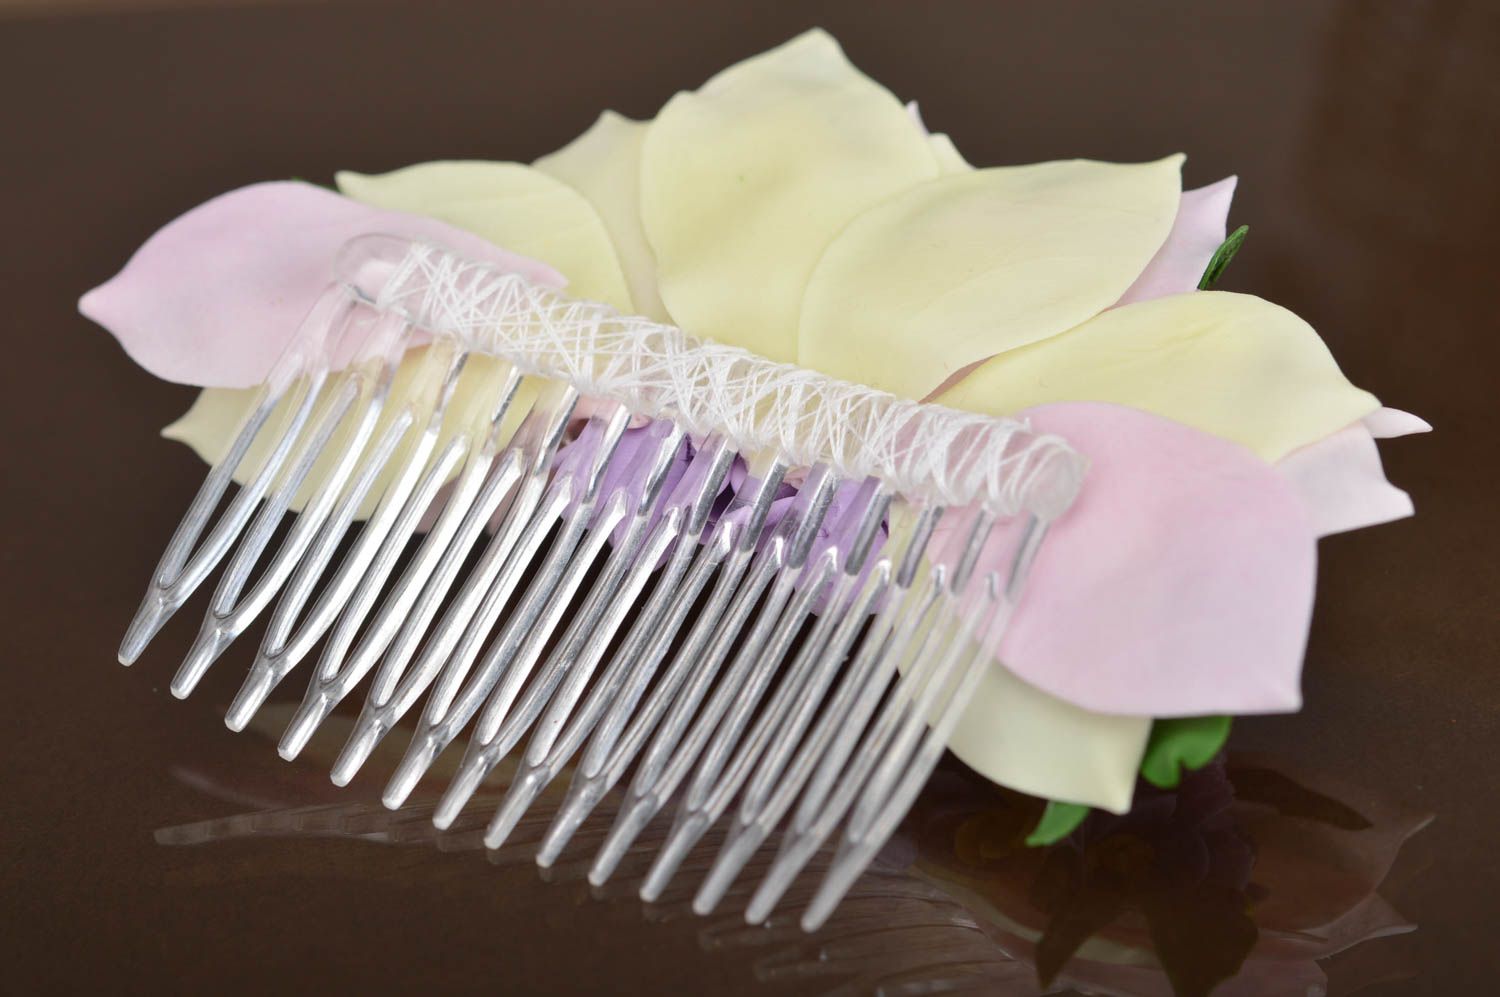 Violet cute handmade beautiful hair comb with flowers made of polymer clay photo 5